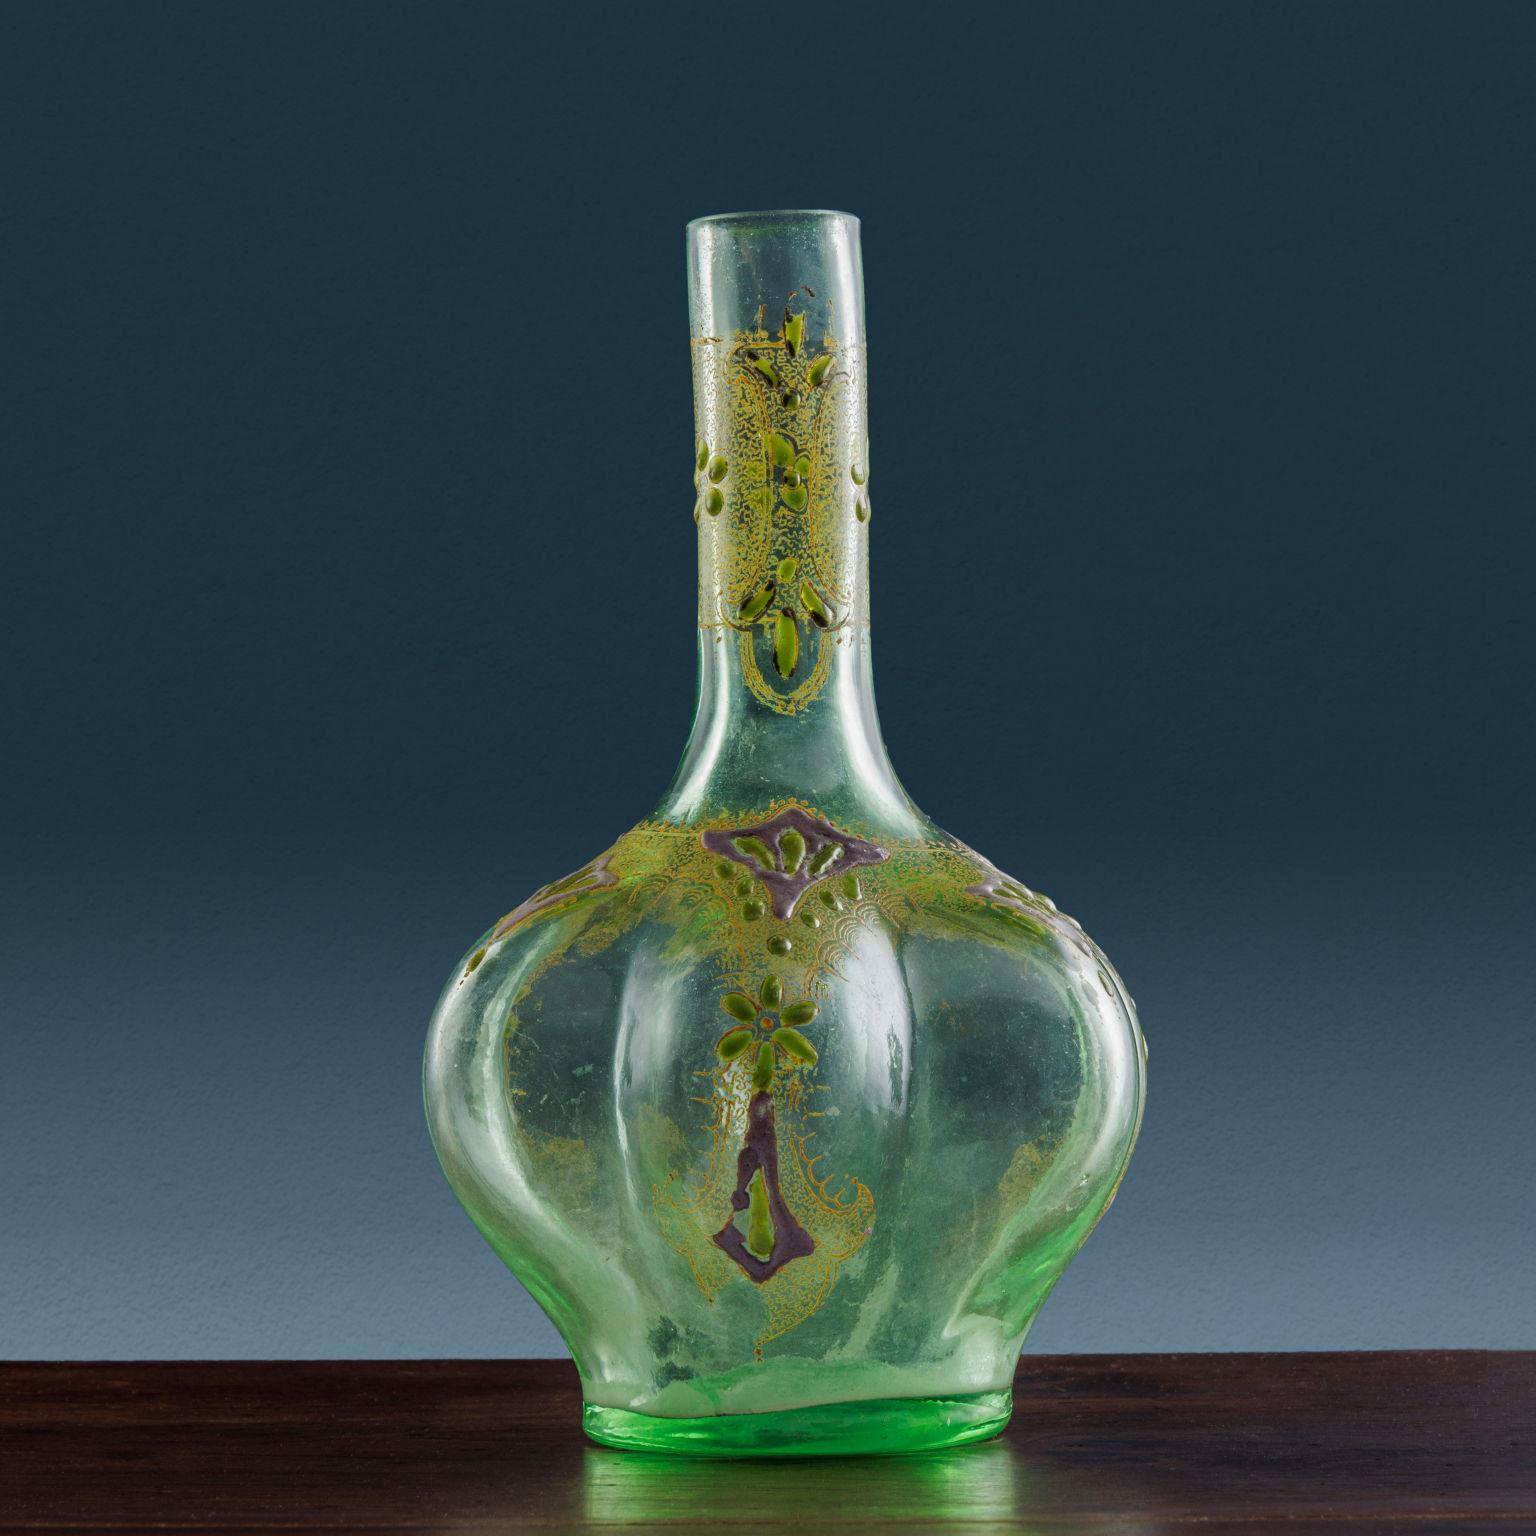 Green blown glass vase characterized by bulbous elements in the body molding, decorated with green, silver, and gold enamels present on both the body and neck of the vase. The enamels depict floral designs flanked by ornamental gold motifs of